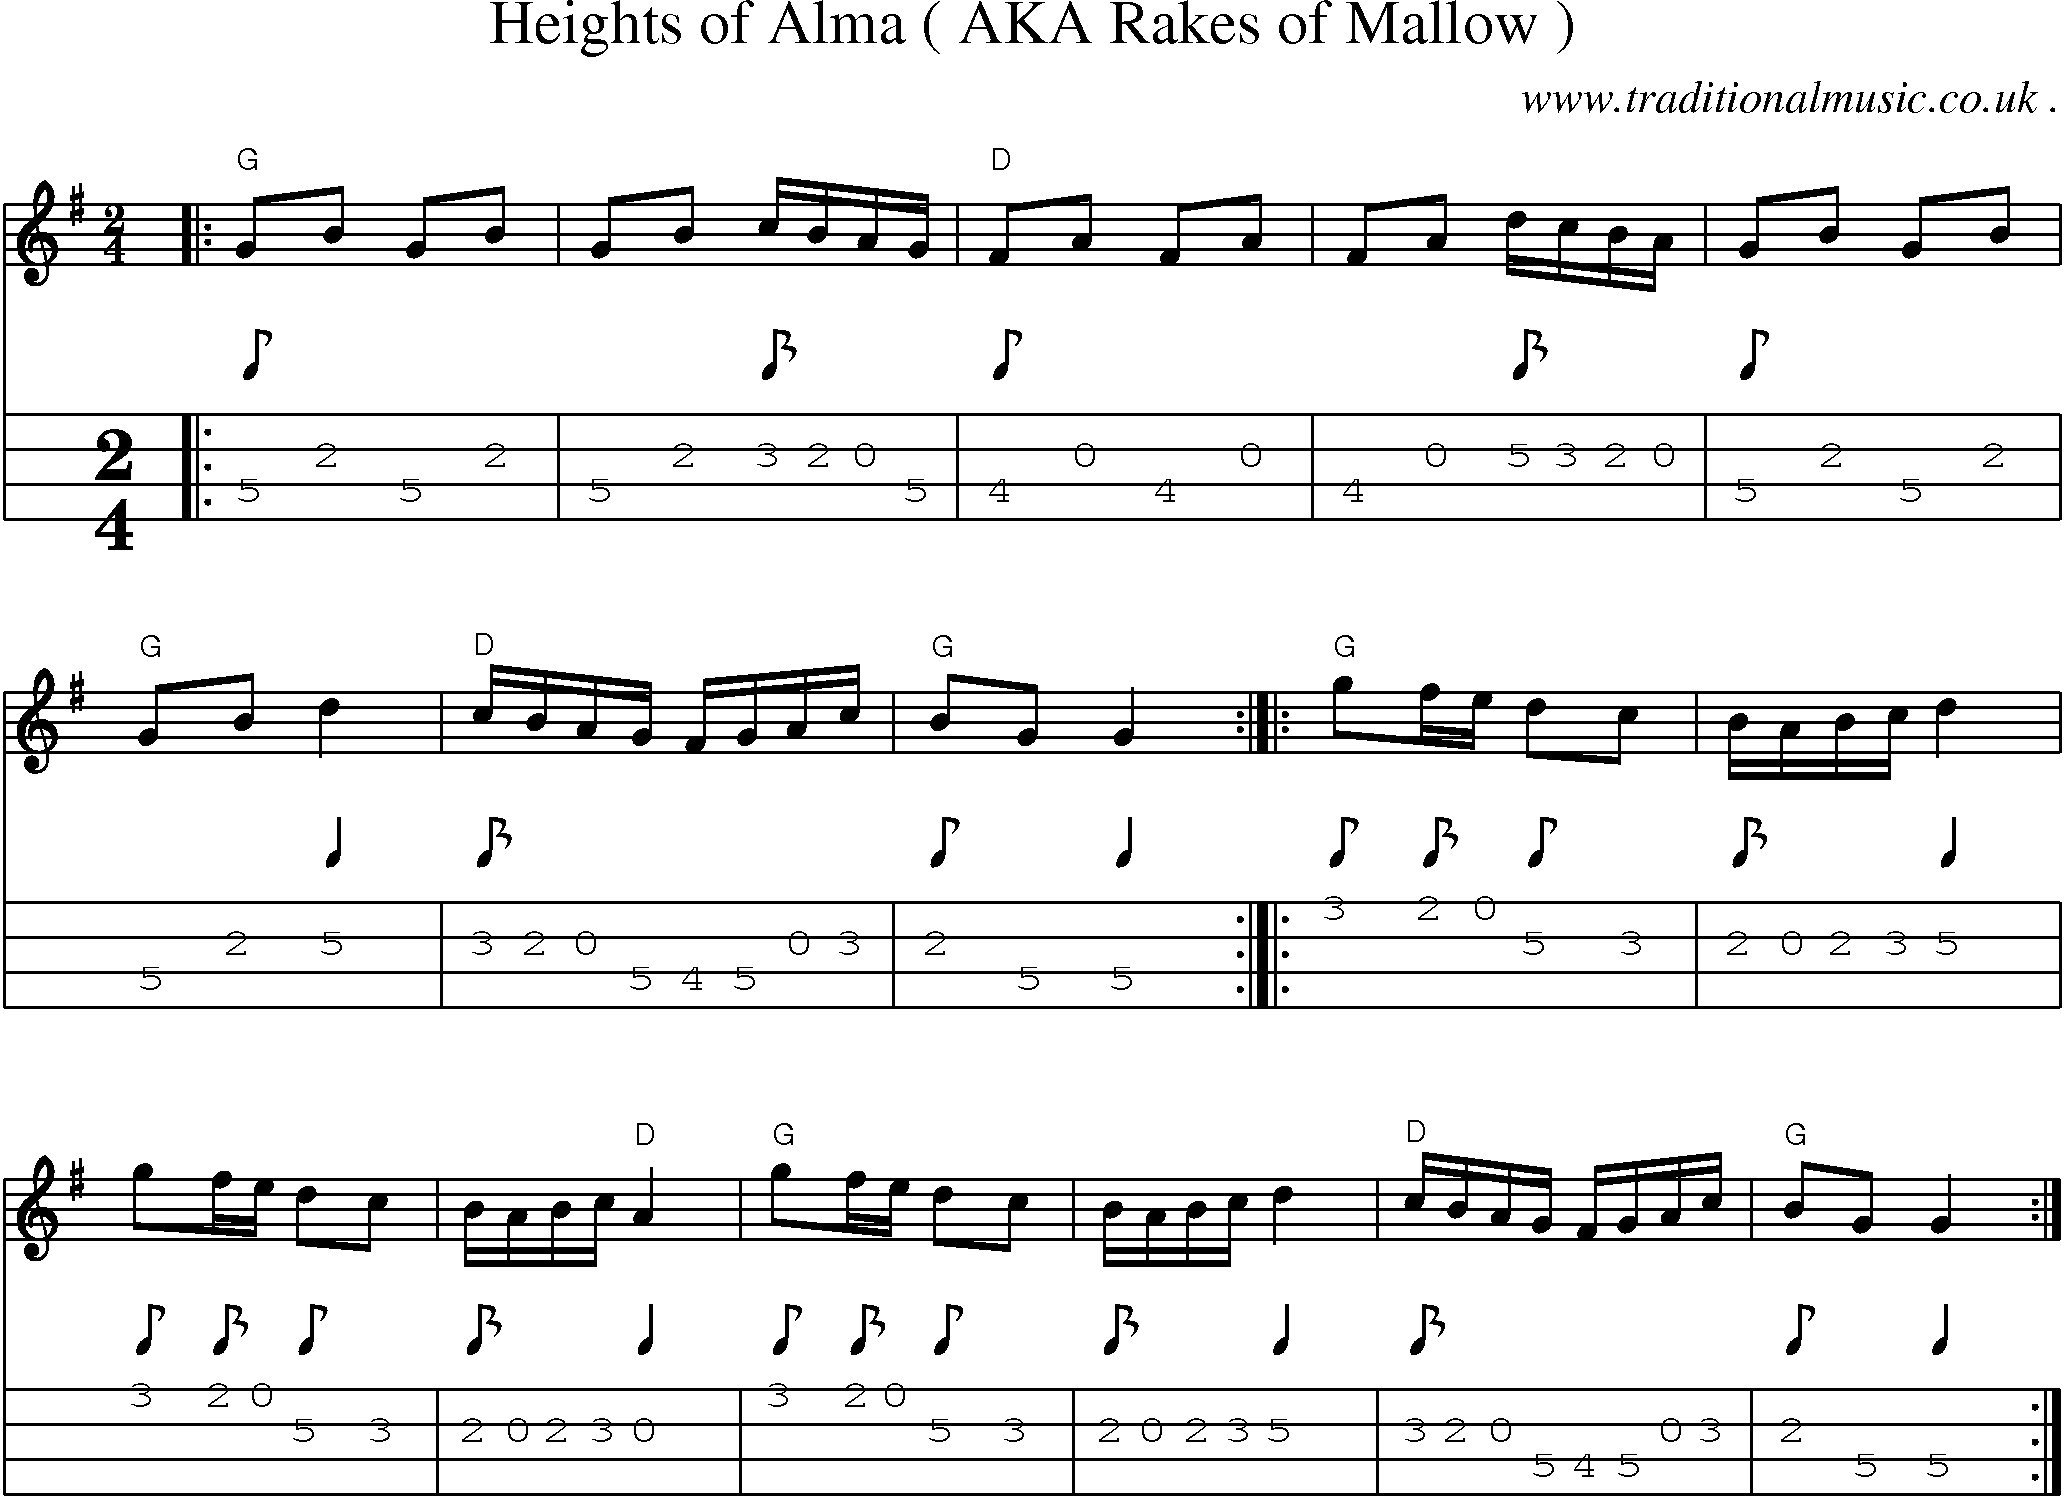 Music Score and Guitar Tabs for Heights Of Alma (Aka Rakes Of Mallow)